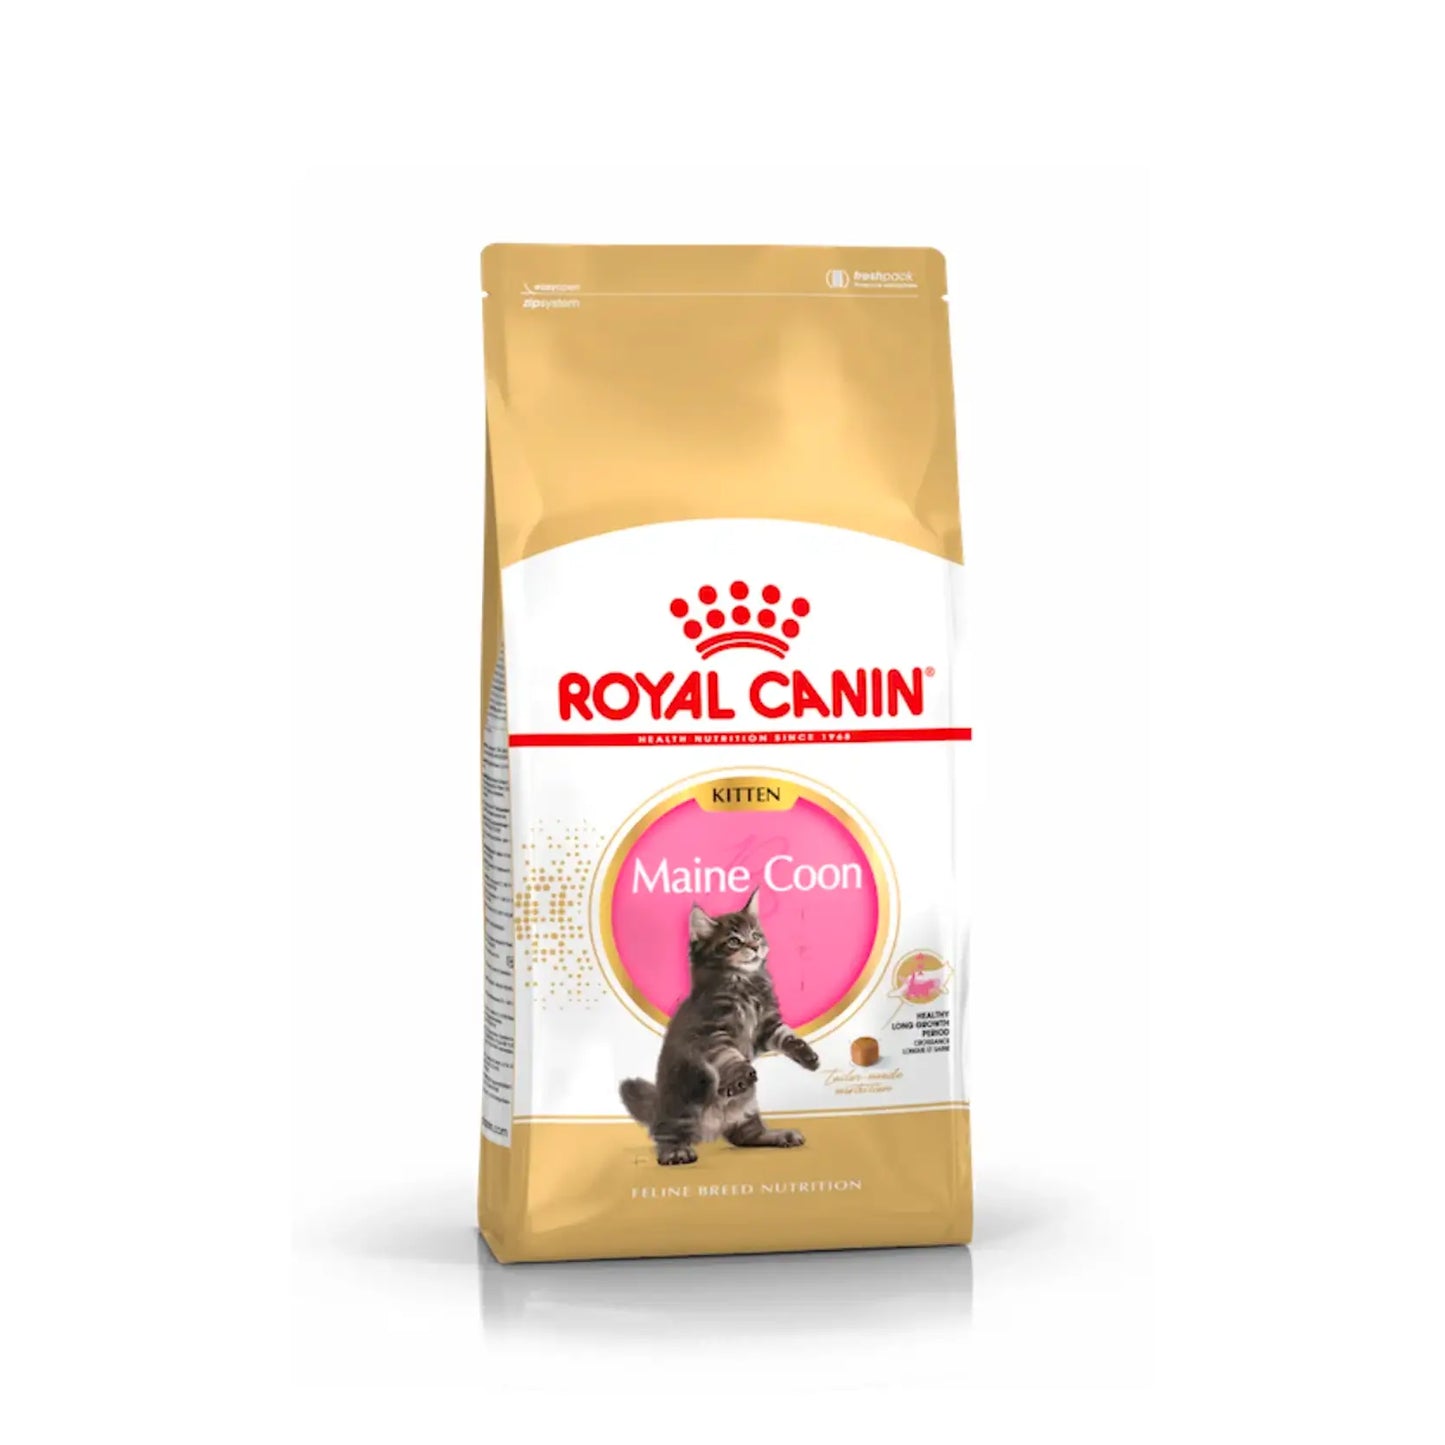 Royal Canin - Kitten Maine Coon Dry Food 10kg